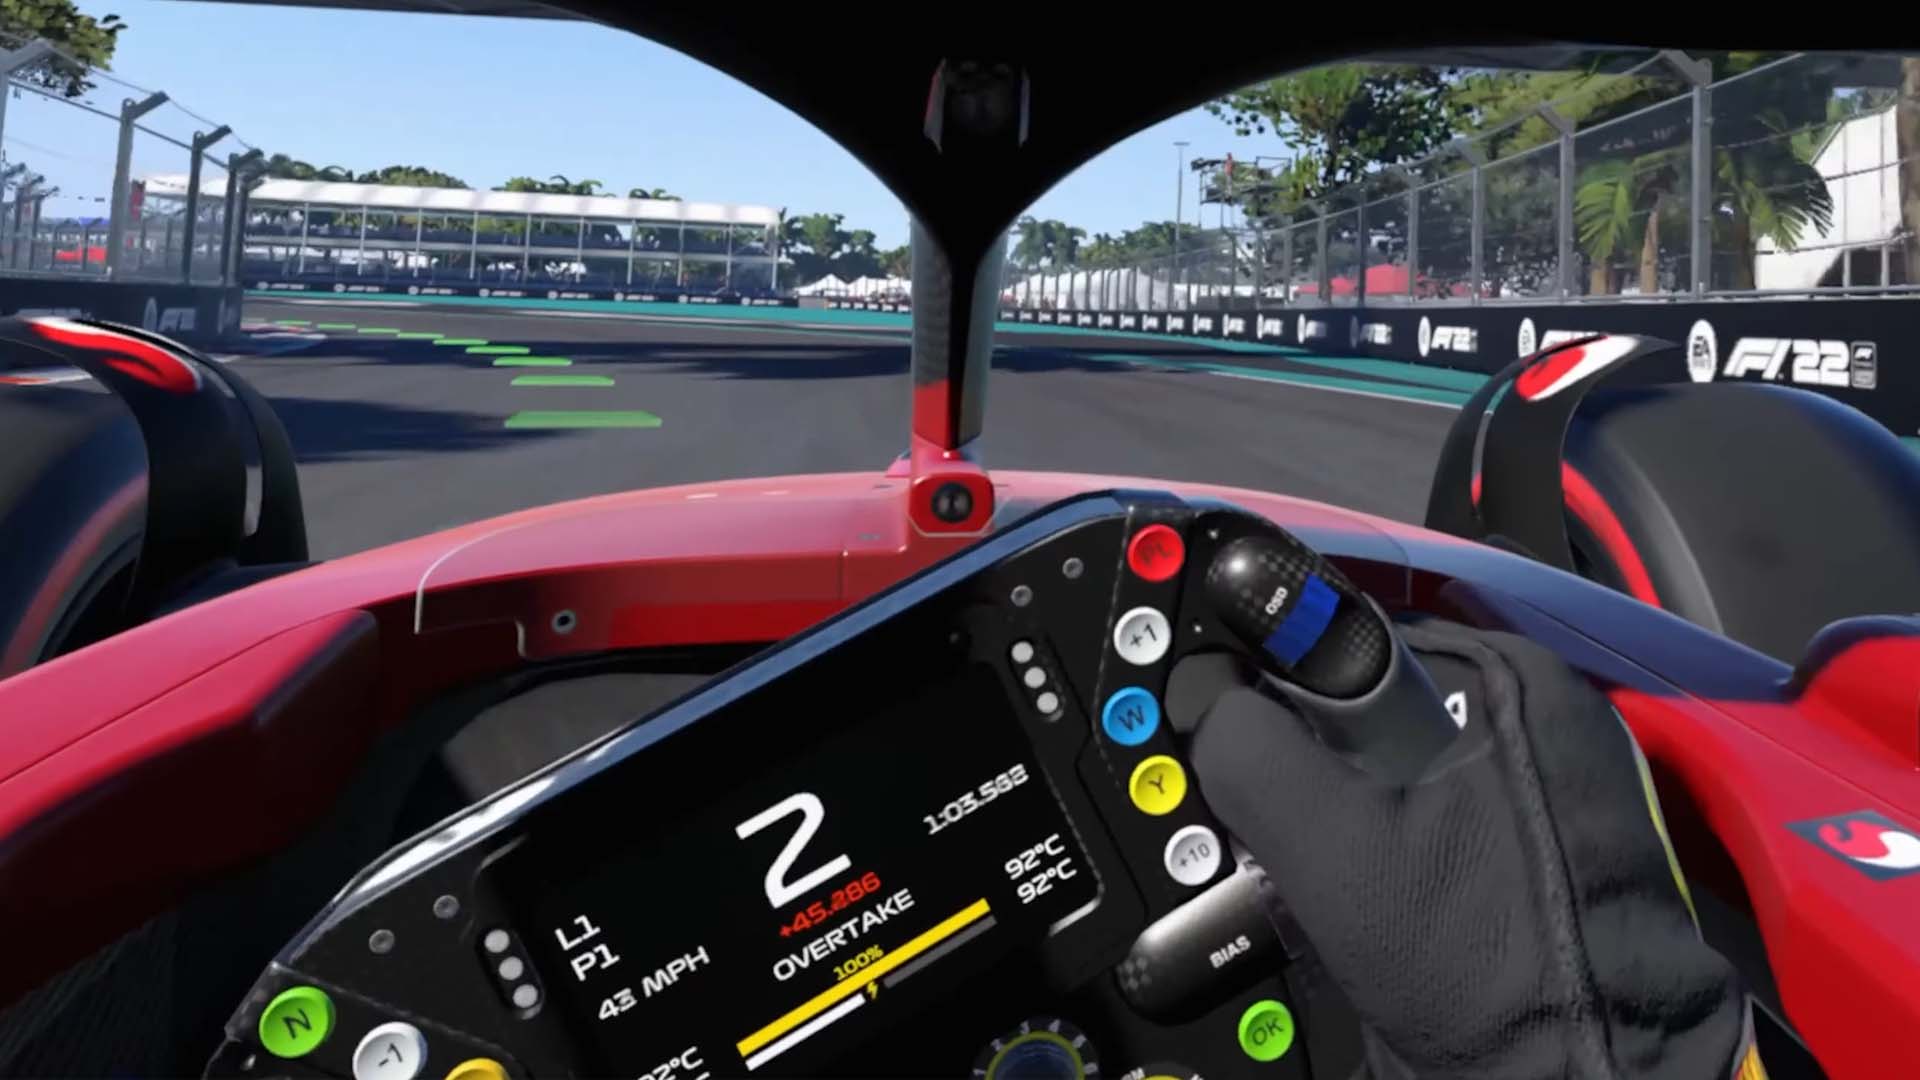 EA F1 22 VR is too blurry, but recording looks good 